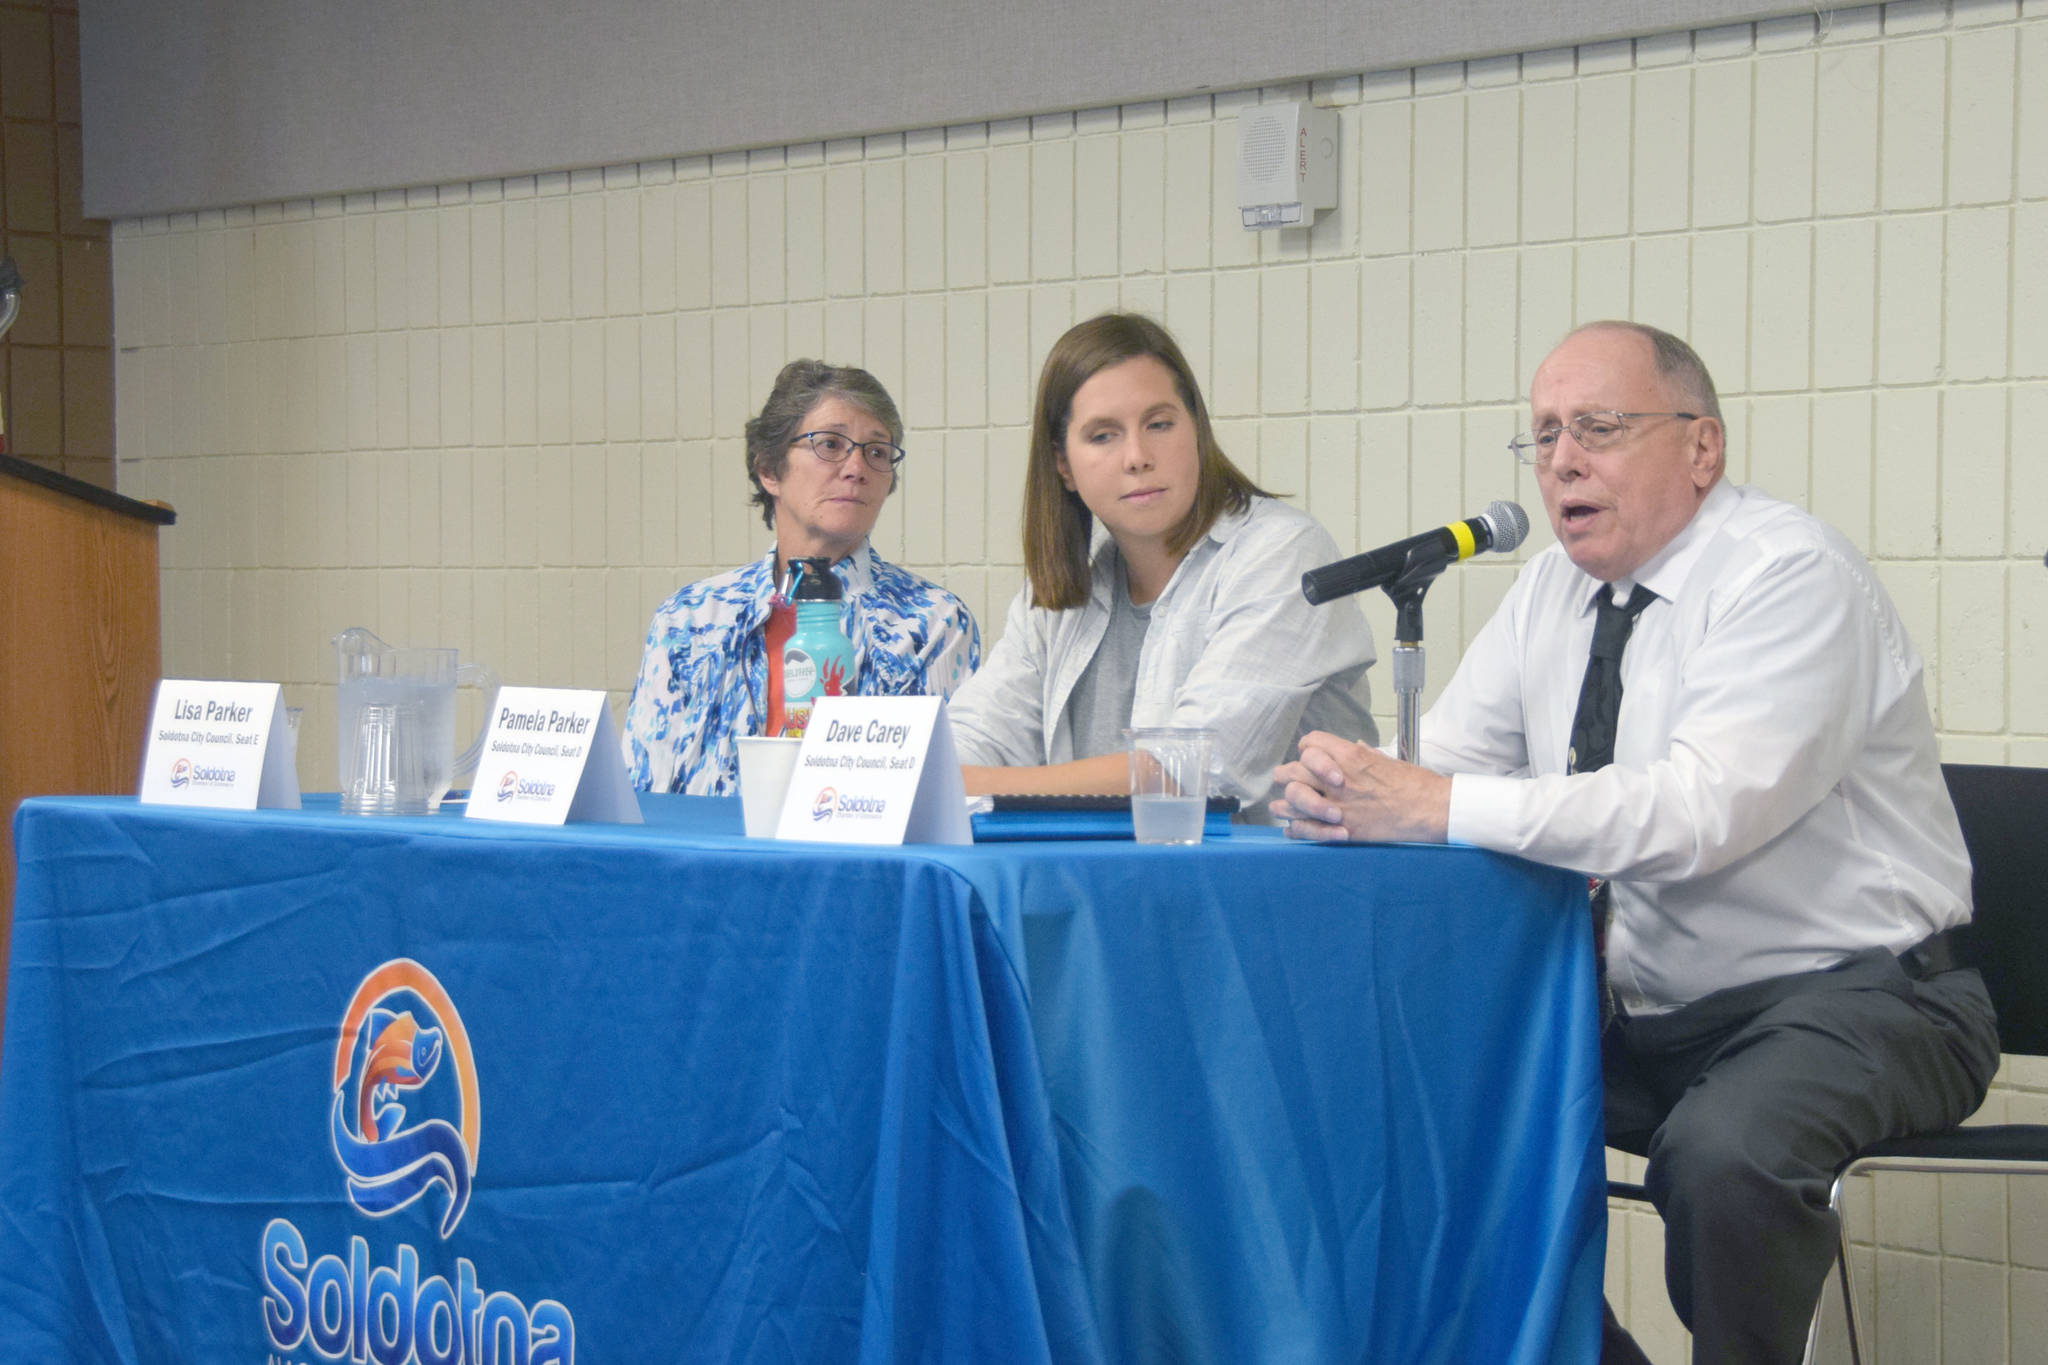 Soldotna City Council candidates Lisa Parker, Pamela Parker and Dave Carey speak to members of the Soldotna Chamber of Commerce at the Soldotna Sports Complex on Sept. 11, 2019. (Photo by Brian Mazurek/Peninsula Clarion)